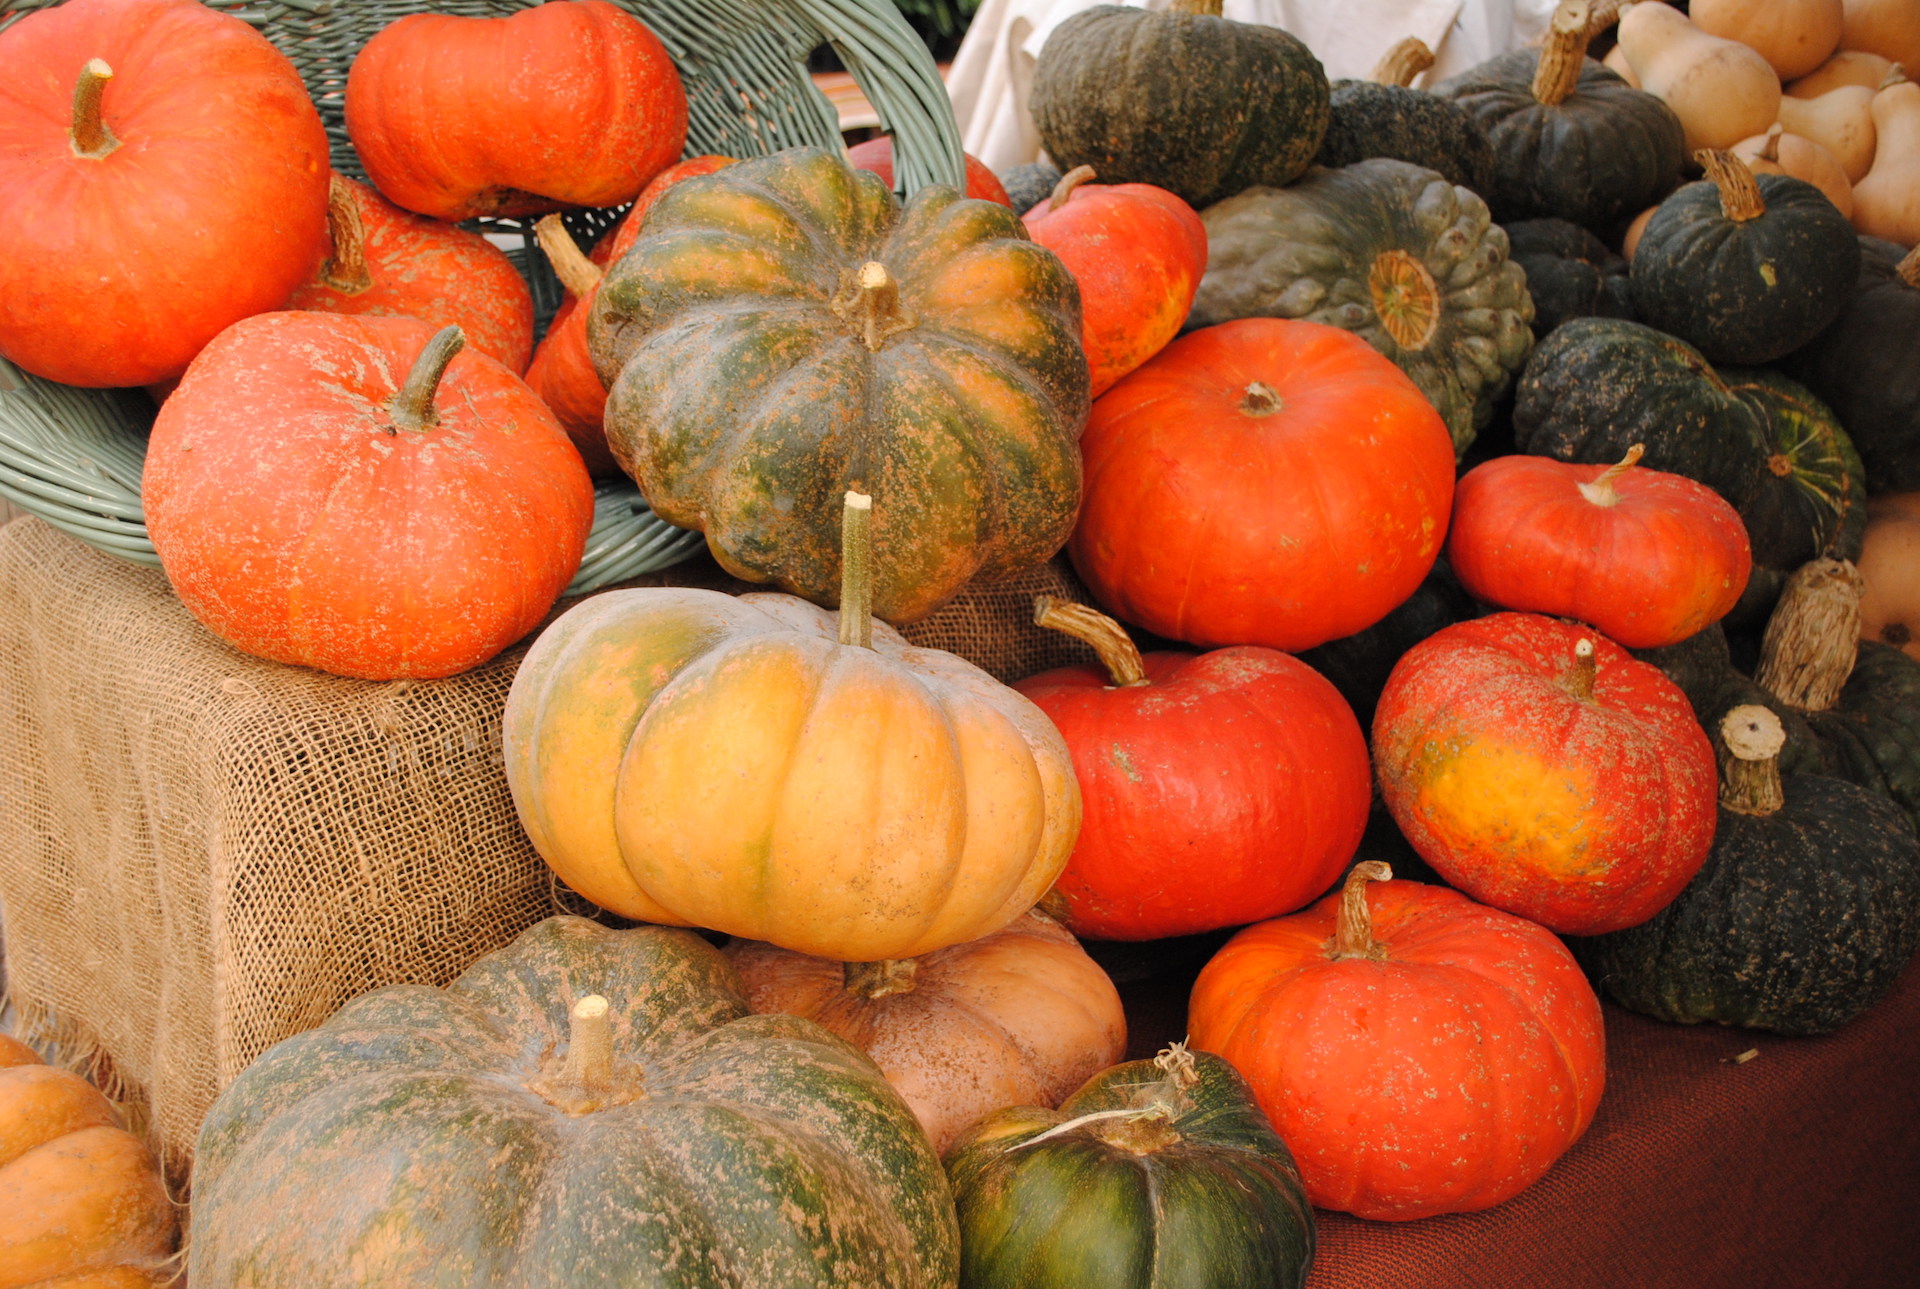 A colorful assortment of winter squash